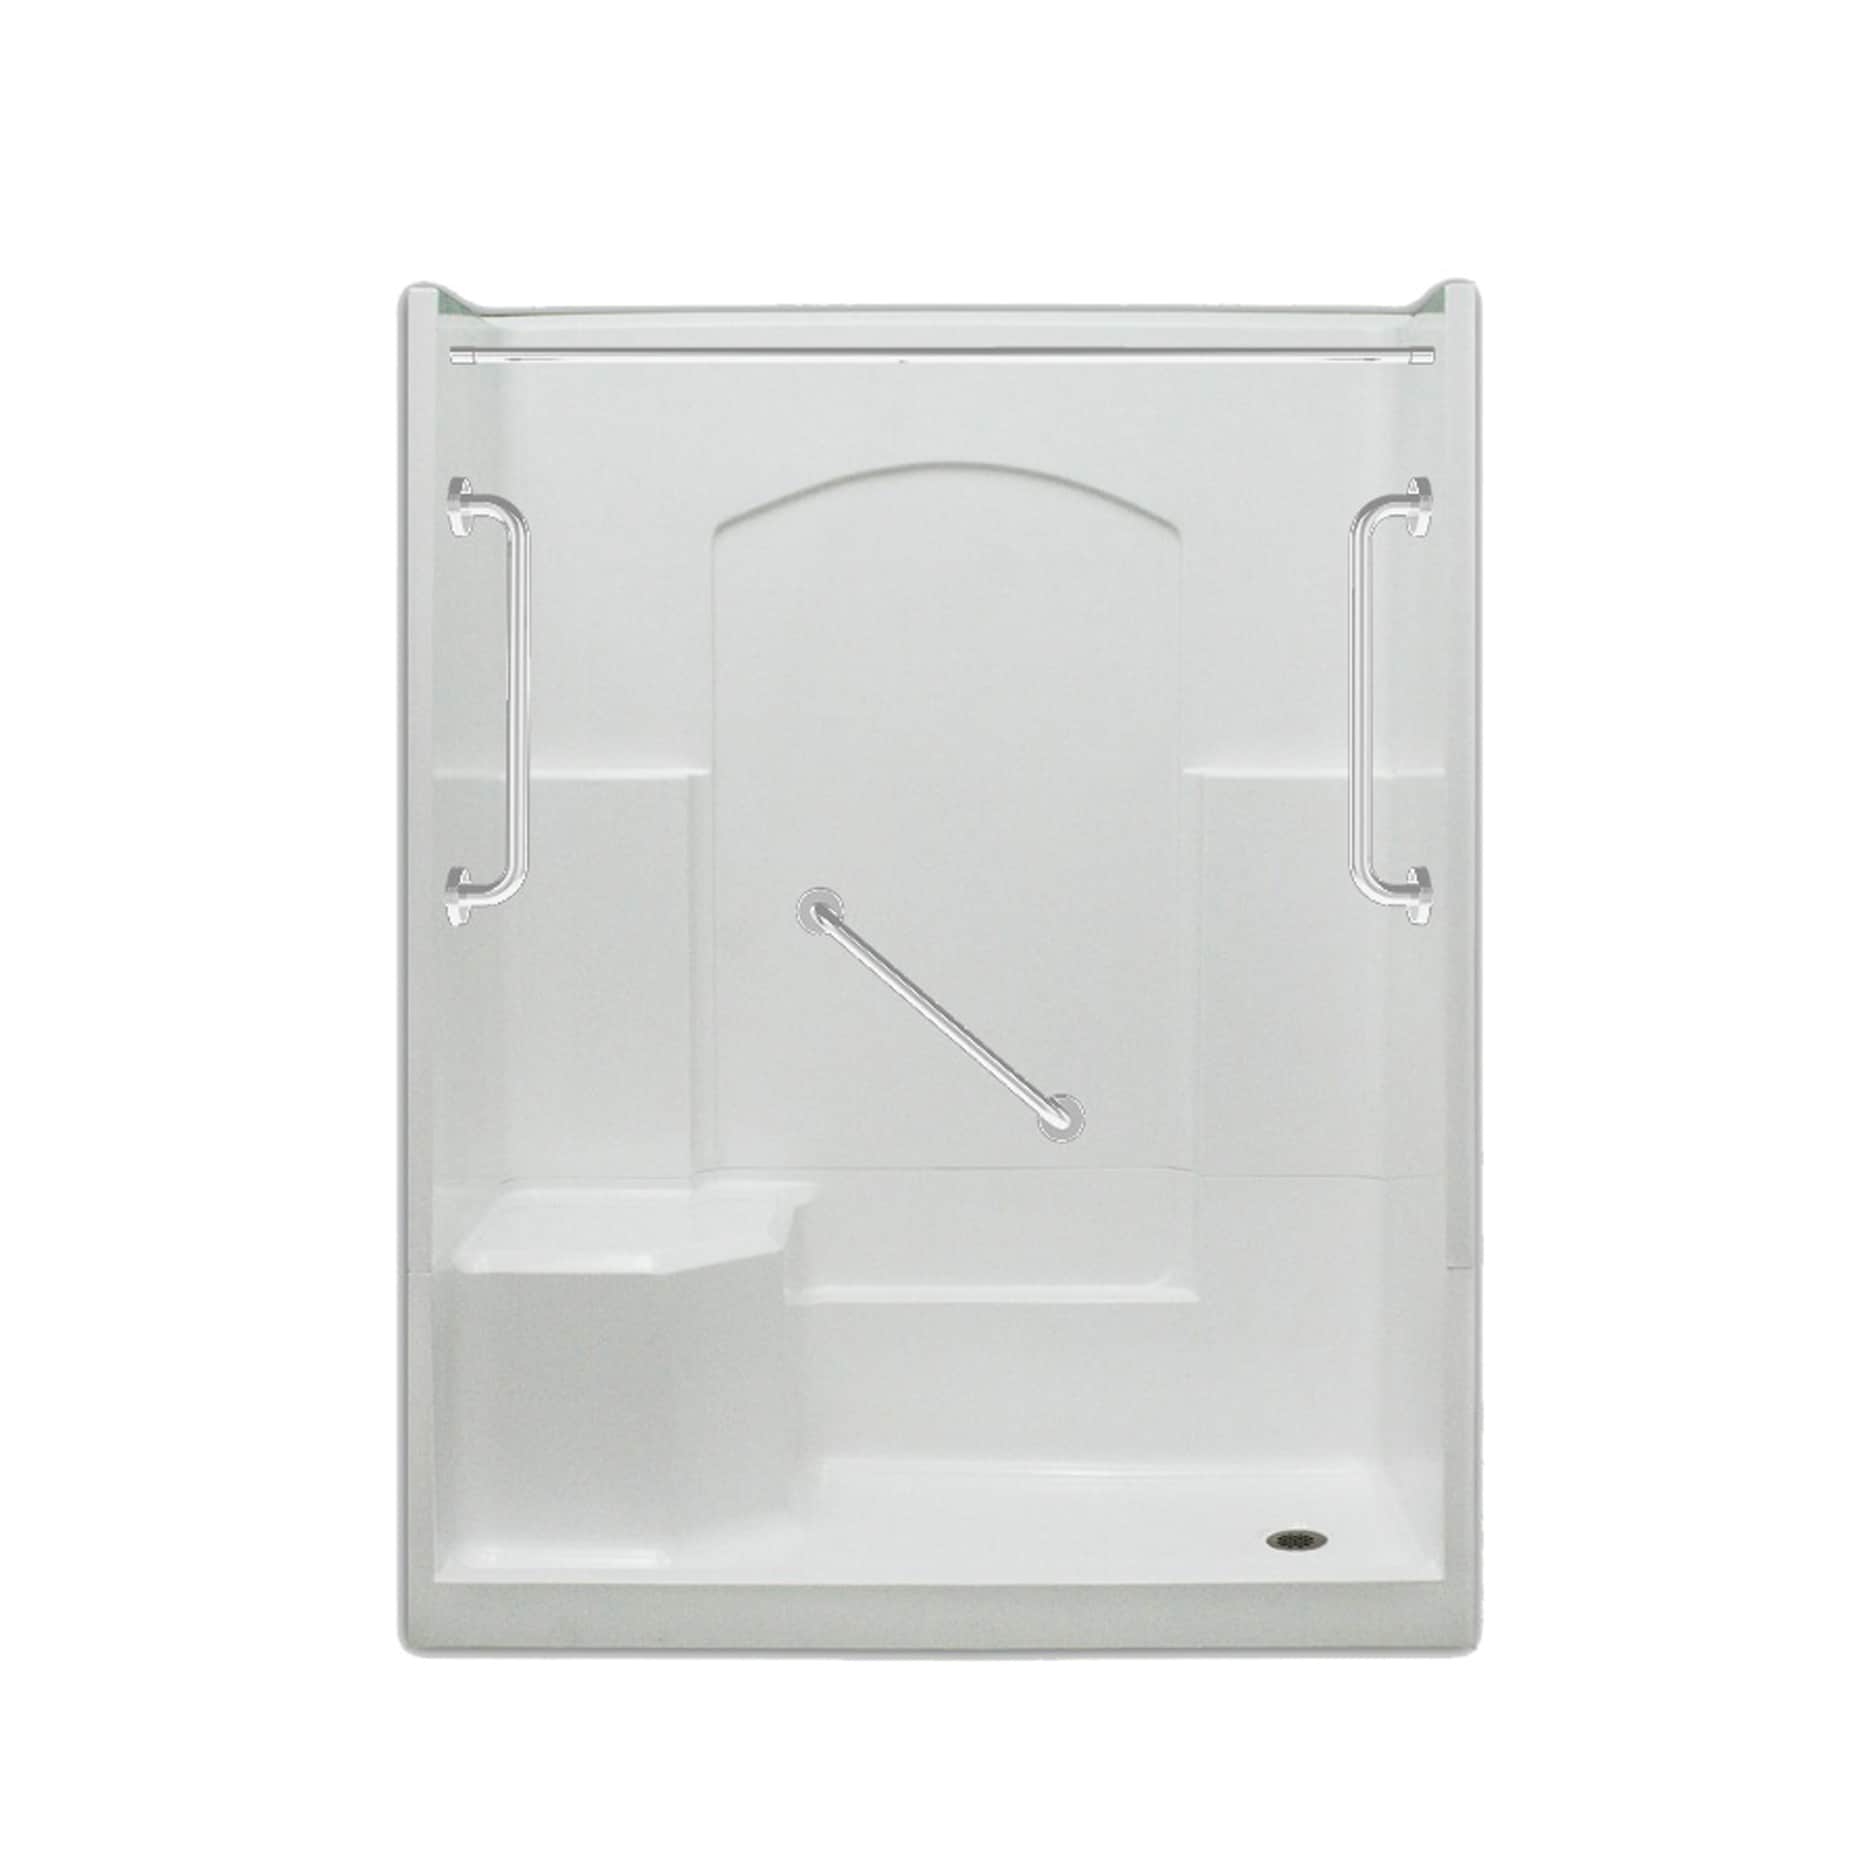 Laurel Mountain Ramer Low Threshold White 77-in x 32-in x 60-in Alcove Shower Kit with Integrated Seat (Right Drain) Stainless Steel